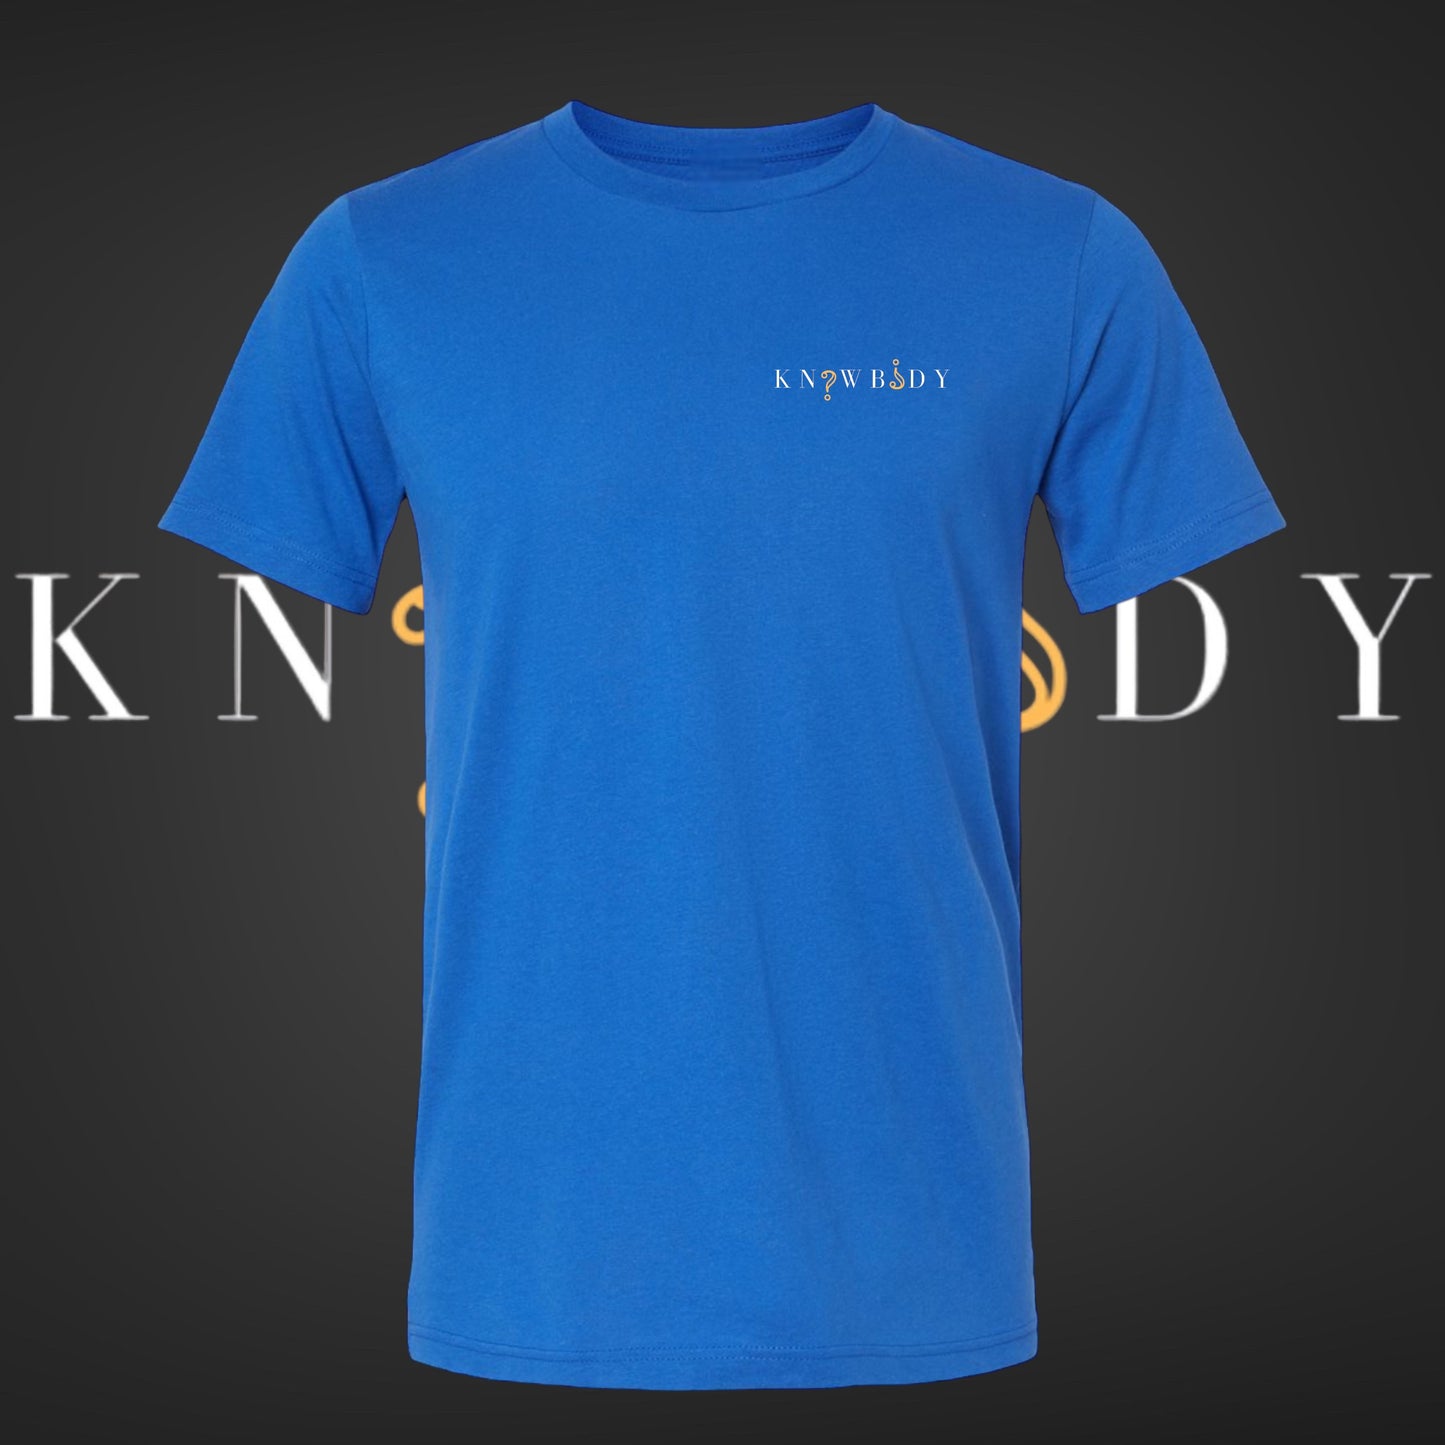 KnowBody “Small Name Plate” Shirt